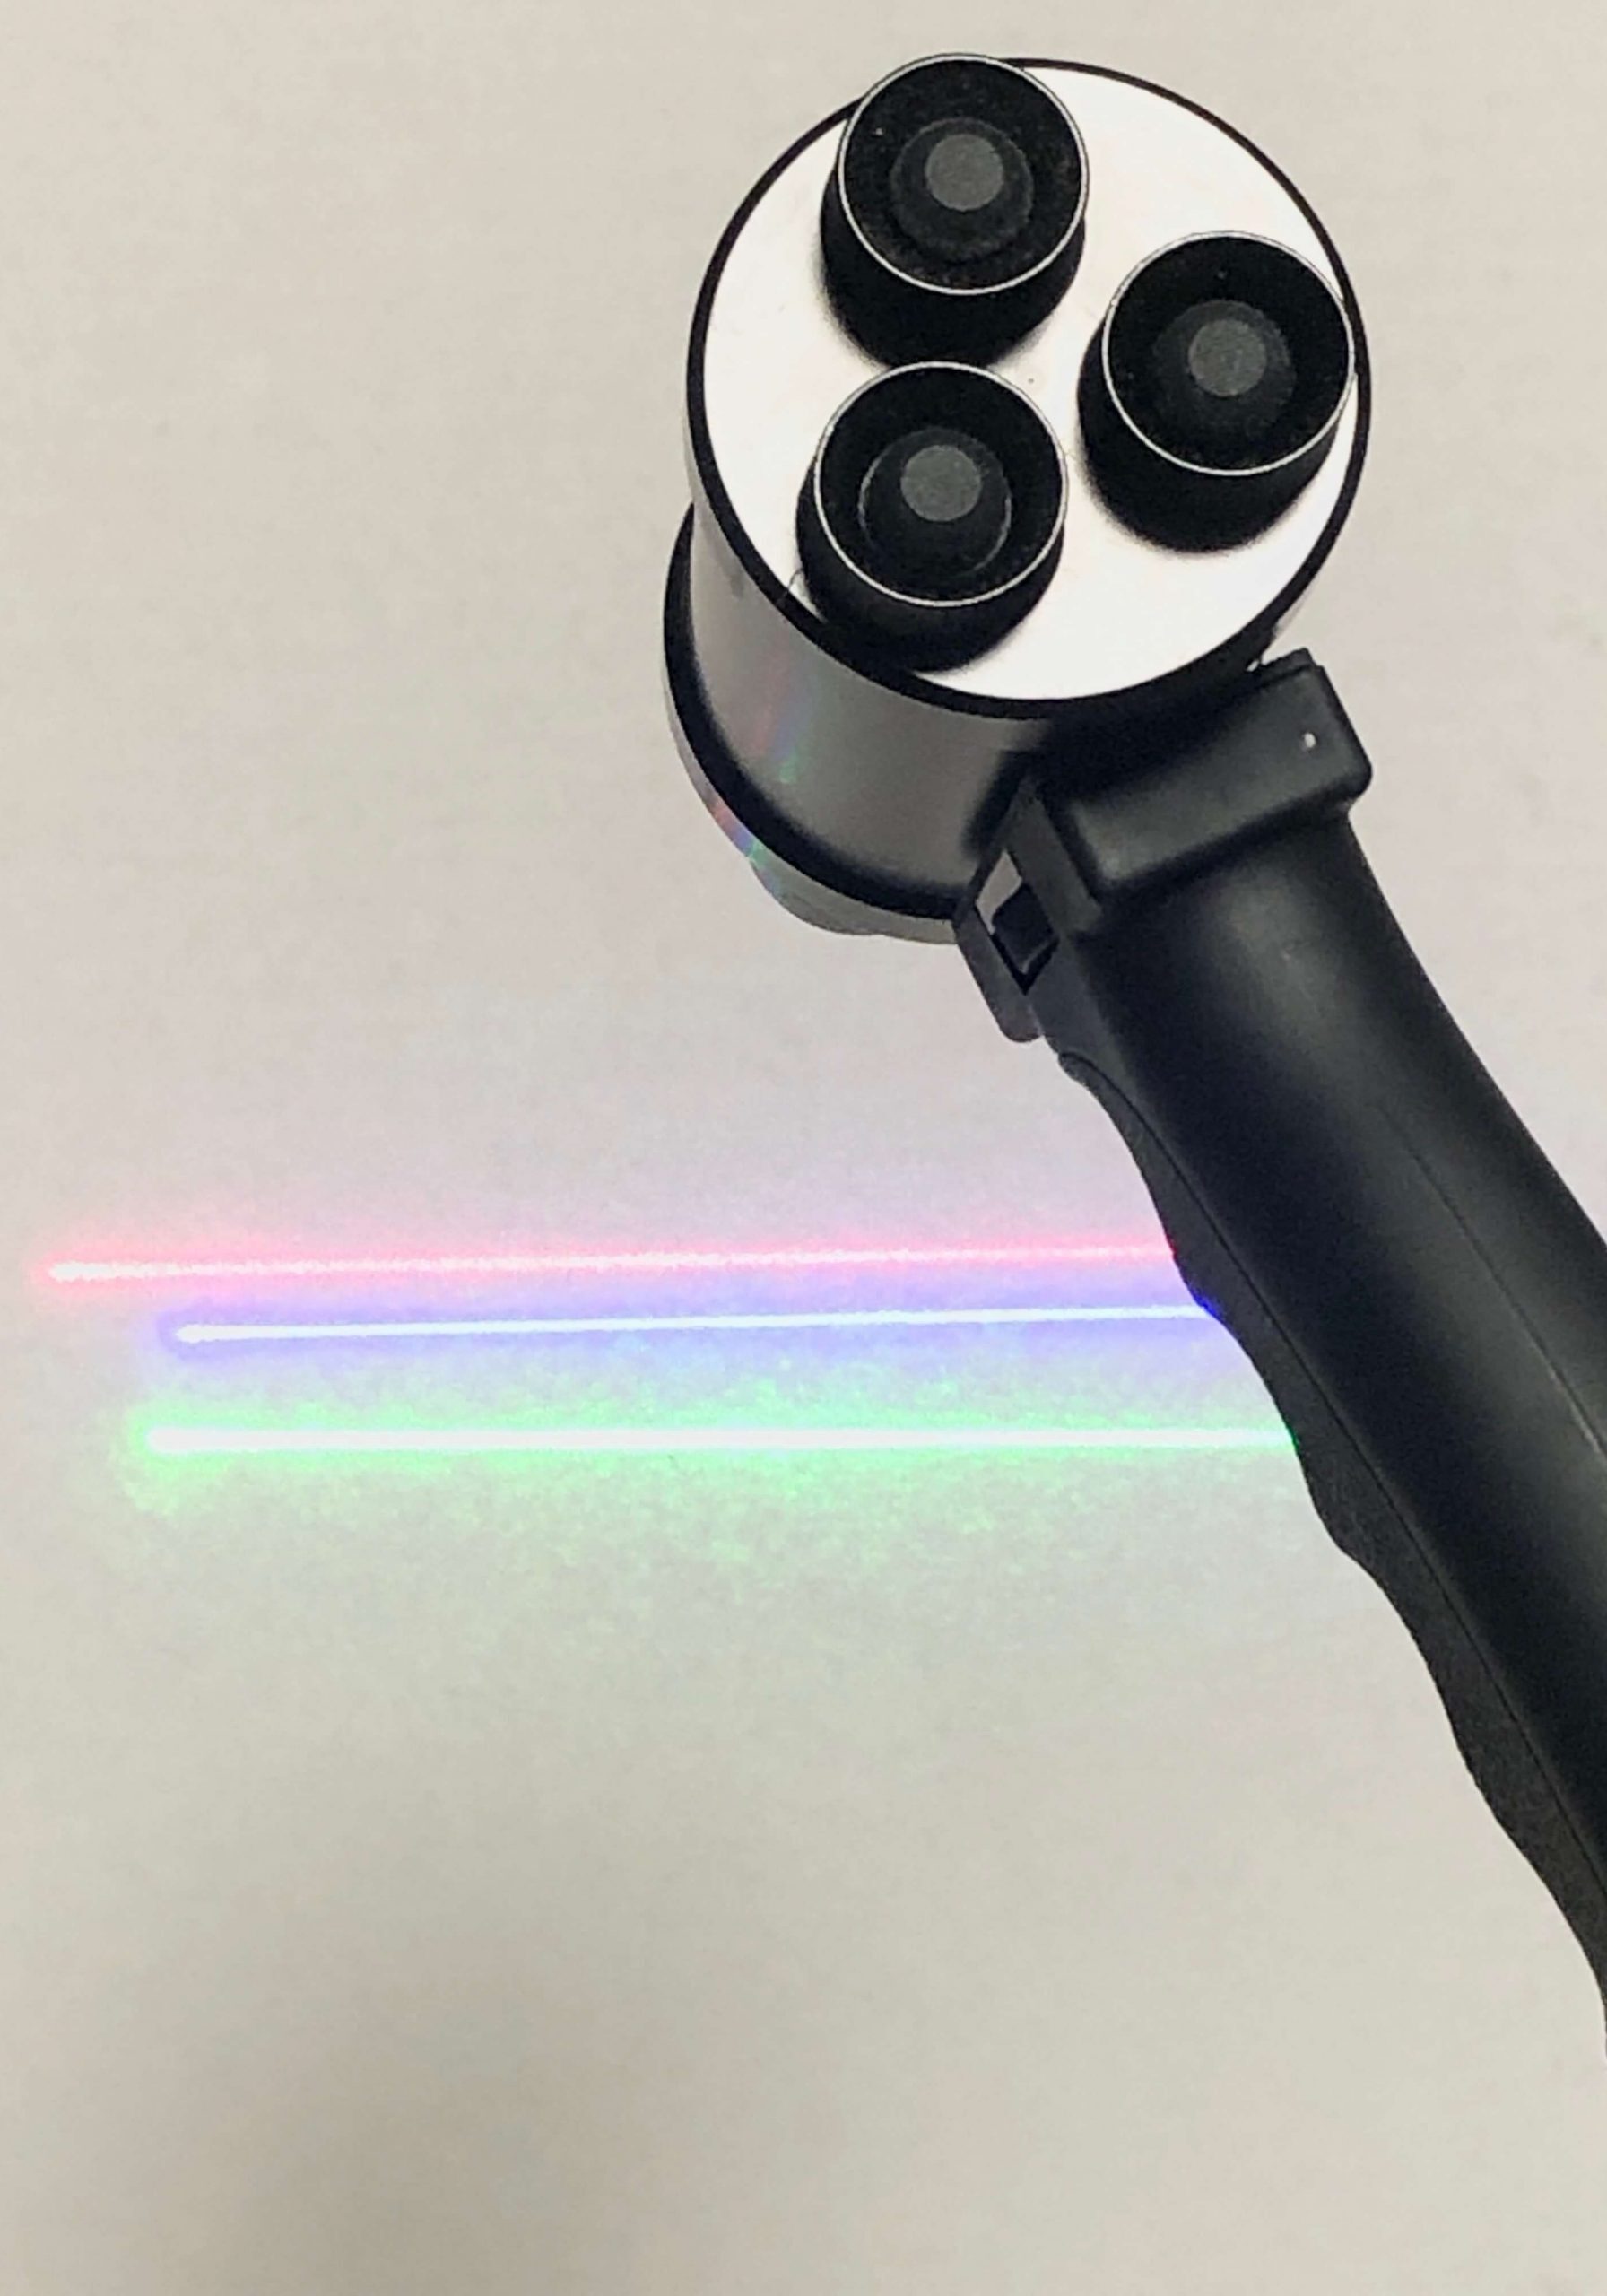 A black and silver camera with rainbow light coming from it.